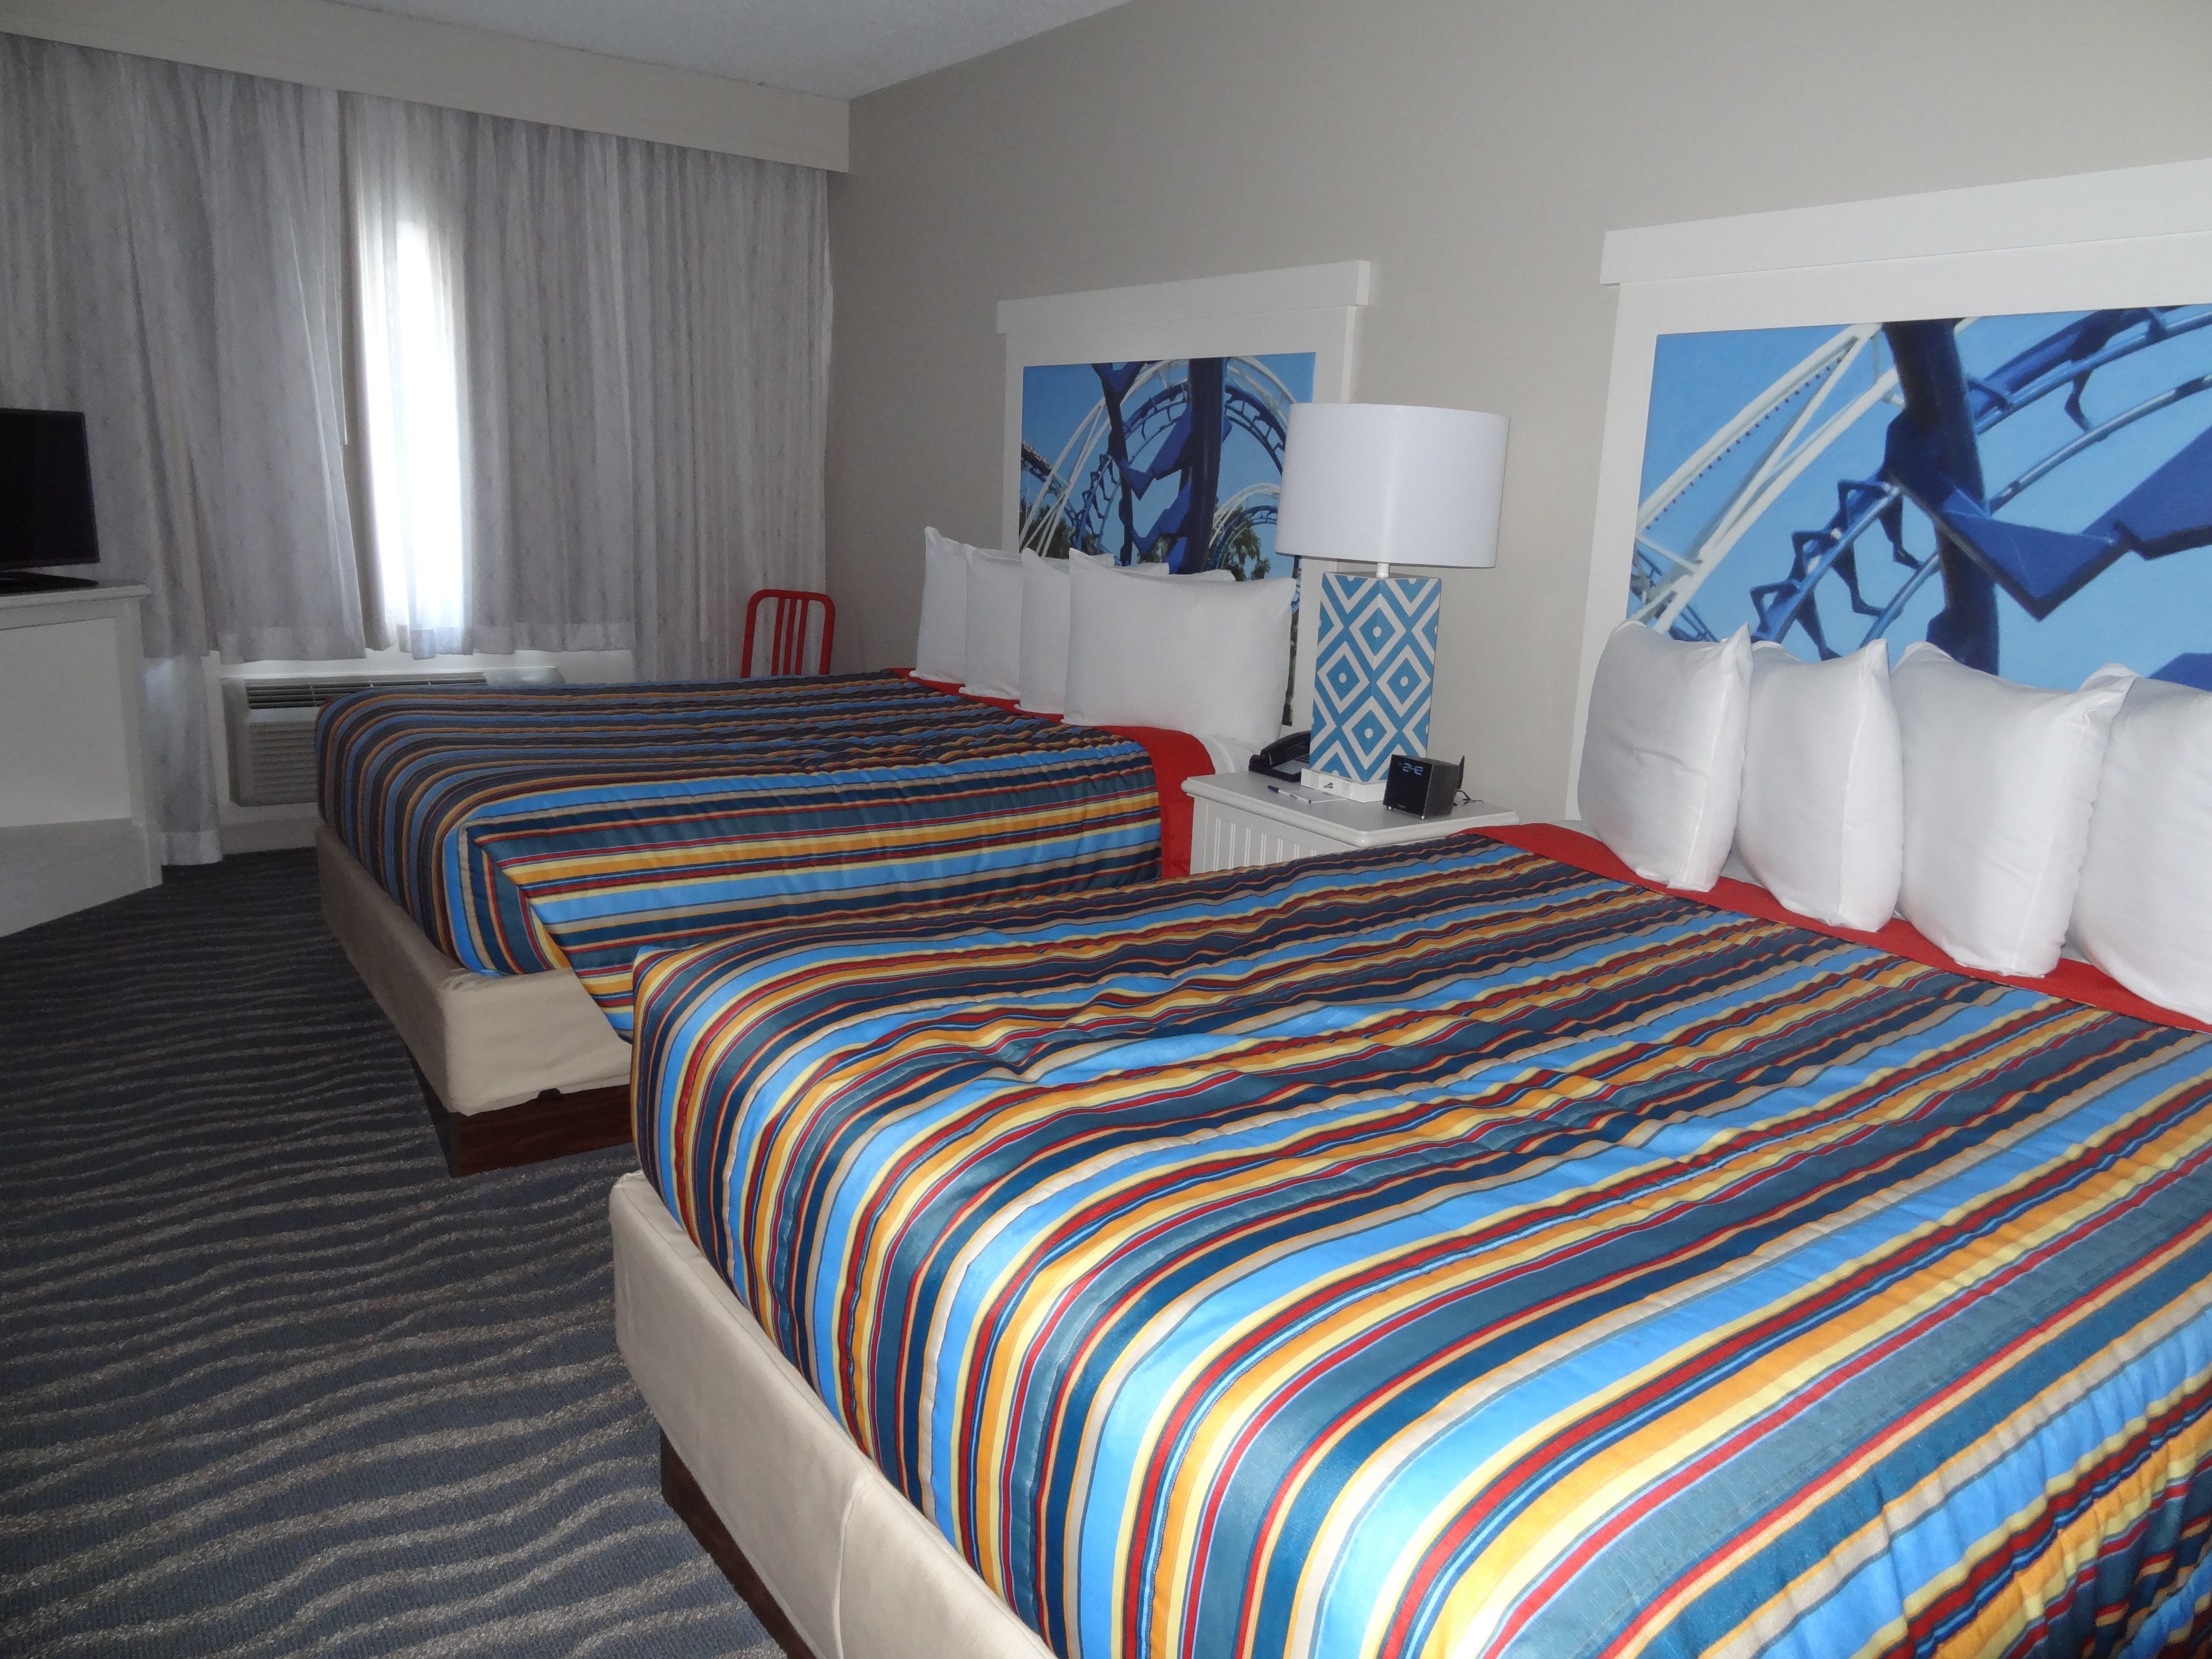 We love it so much I thought I should tell you all the reasons to stay at Hotel Breakers when visiting Cedar Point. It's the perfect family fun destination!